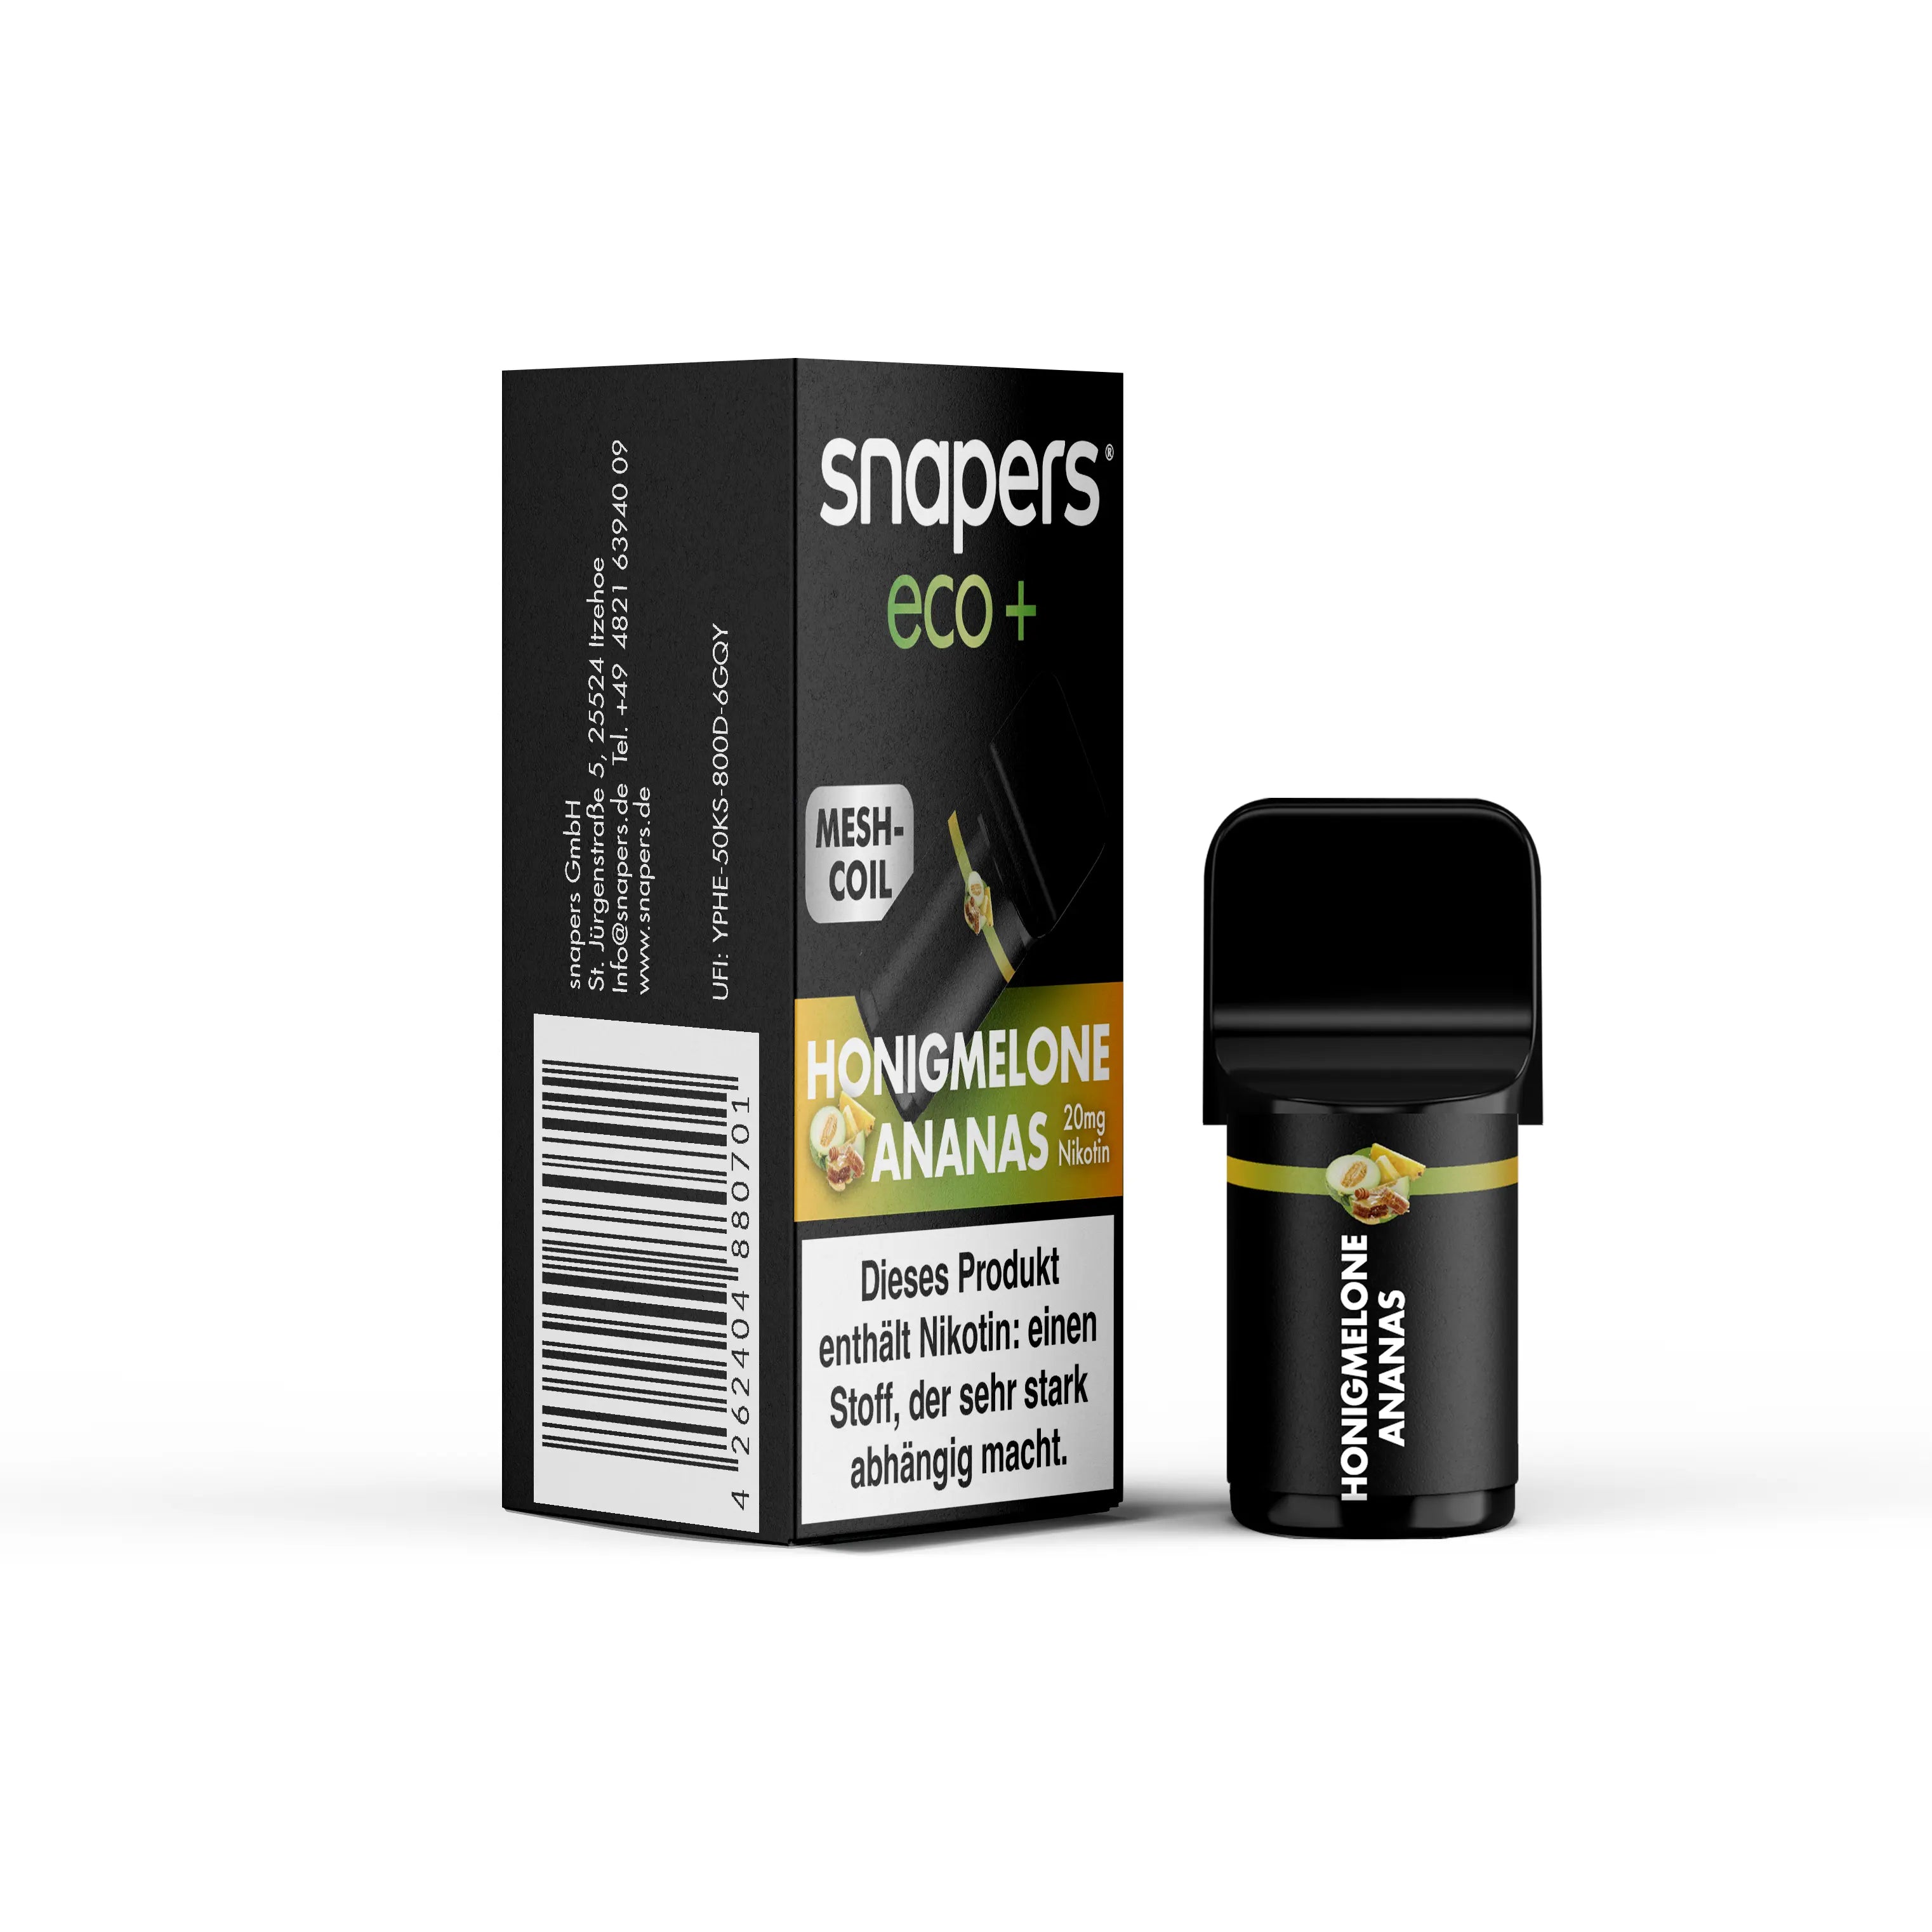 Snapers Eco+ 800 - Honigmelone Ananas